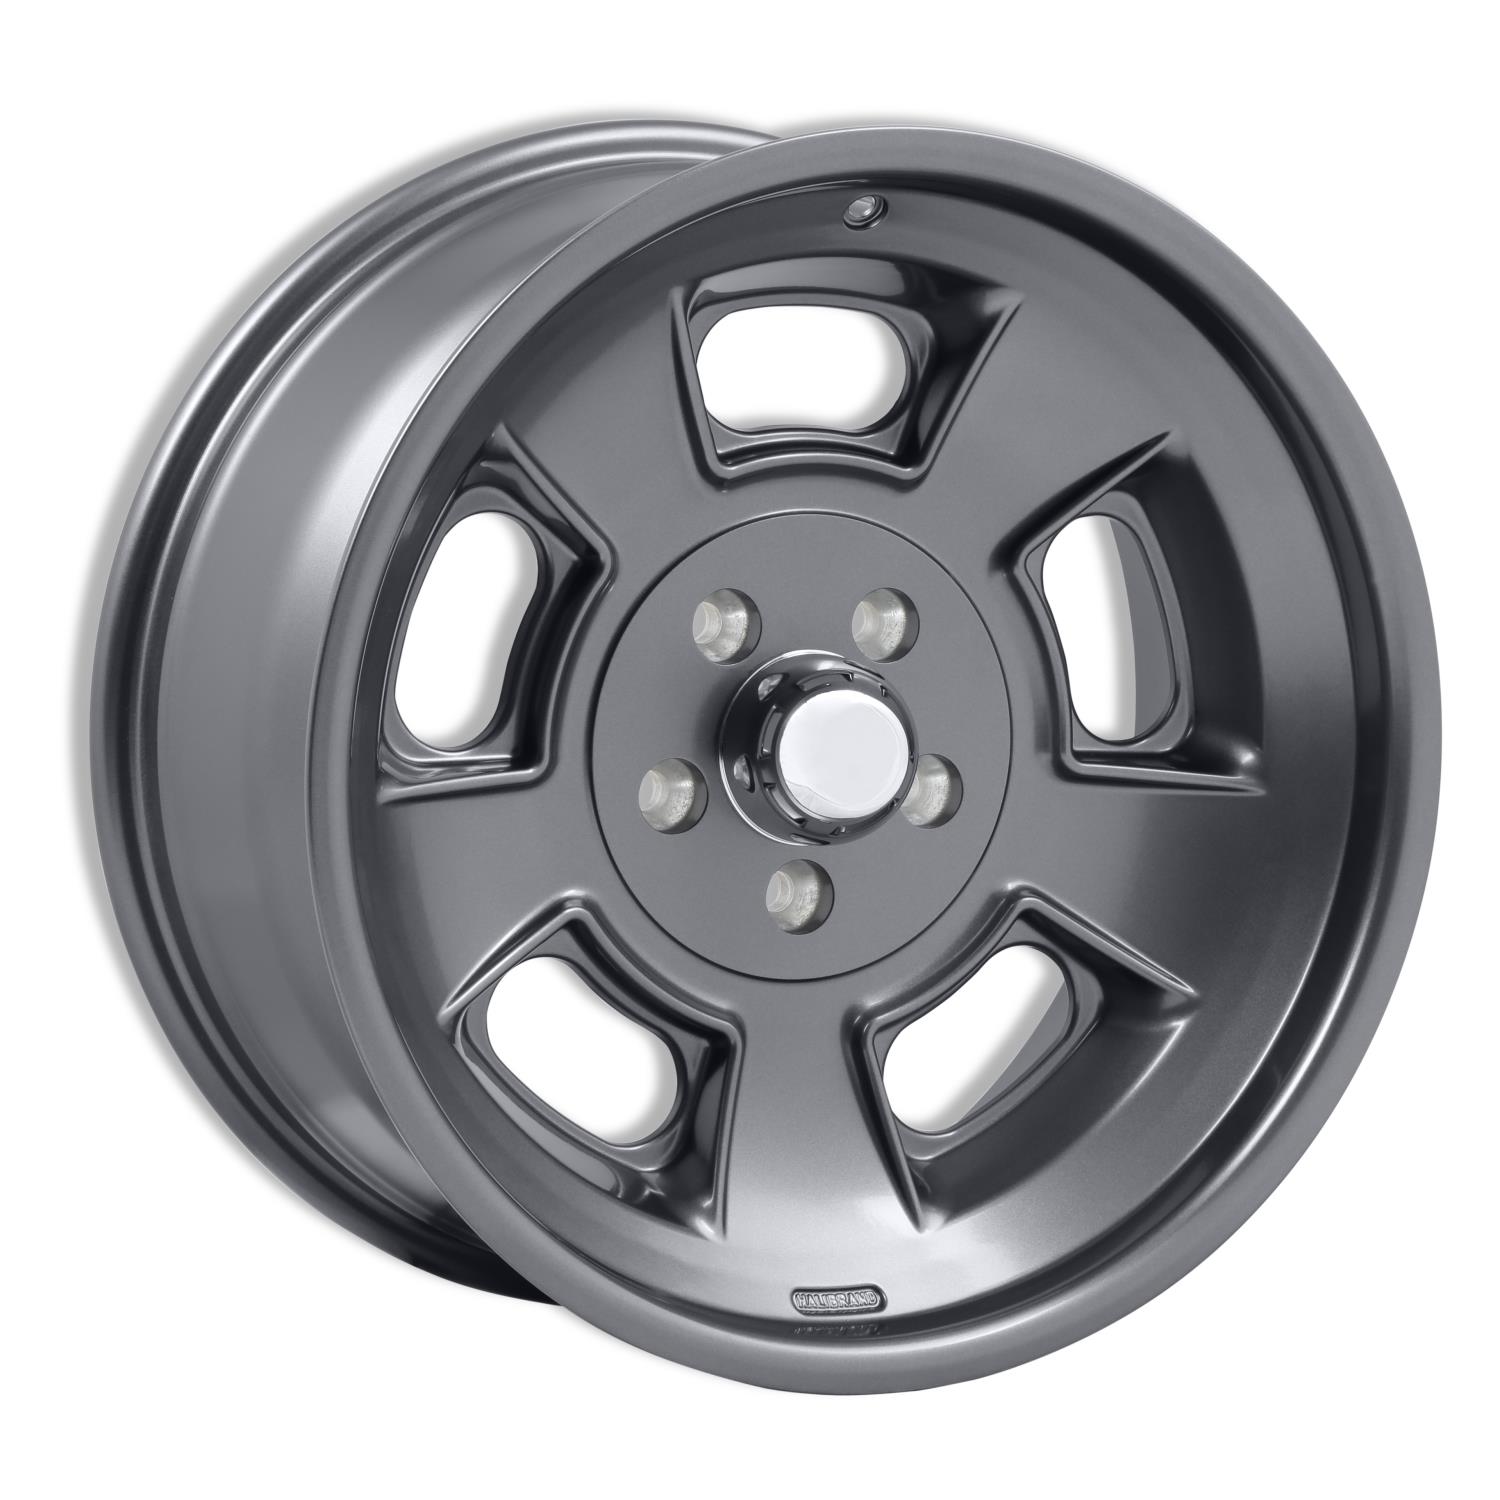 Sprint Front Wheel, Size: 19x8.5", Bolt Pattern: 5x5", Backspace: 4.5" [Anthracite - Semi Gloss Clearcoat]